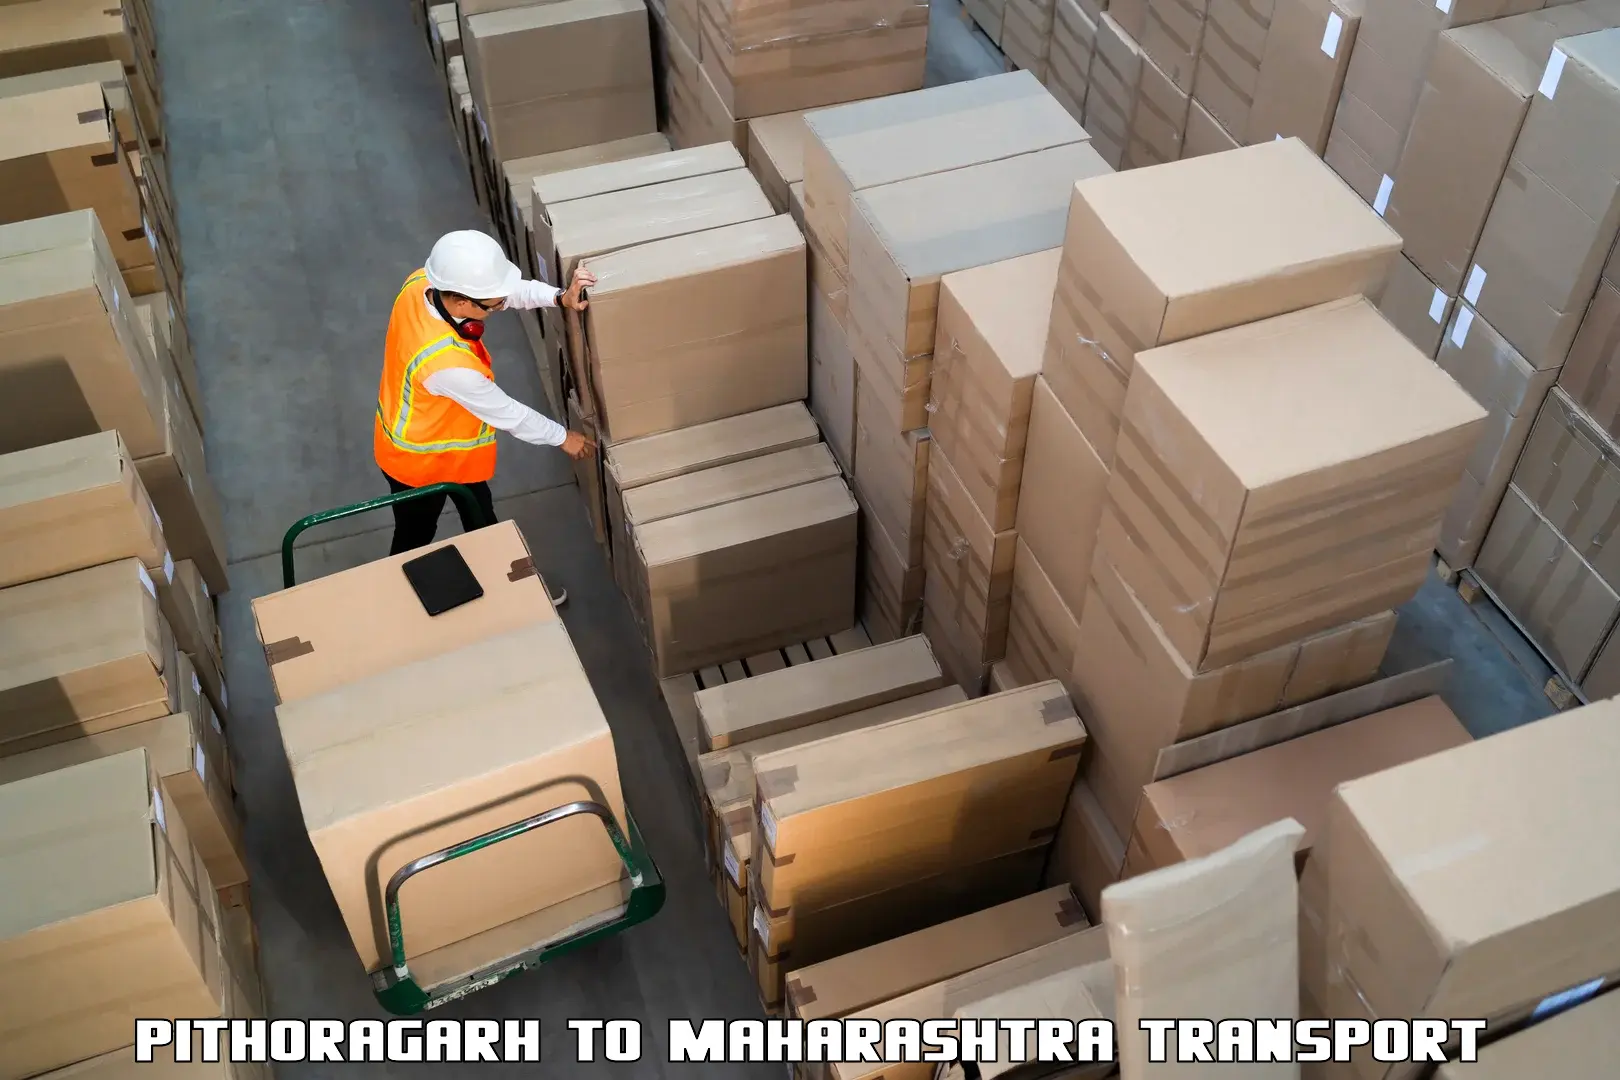 Air freight transport services in Pithoragarh to Maharashtra